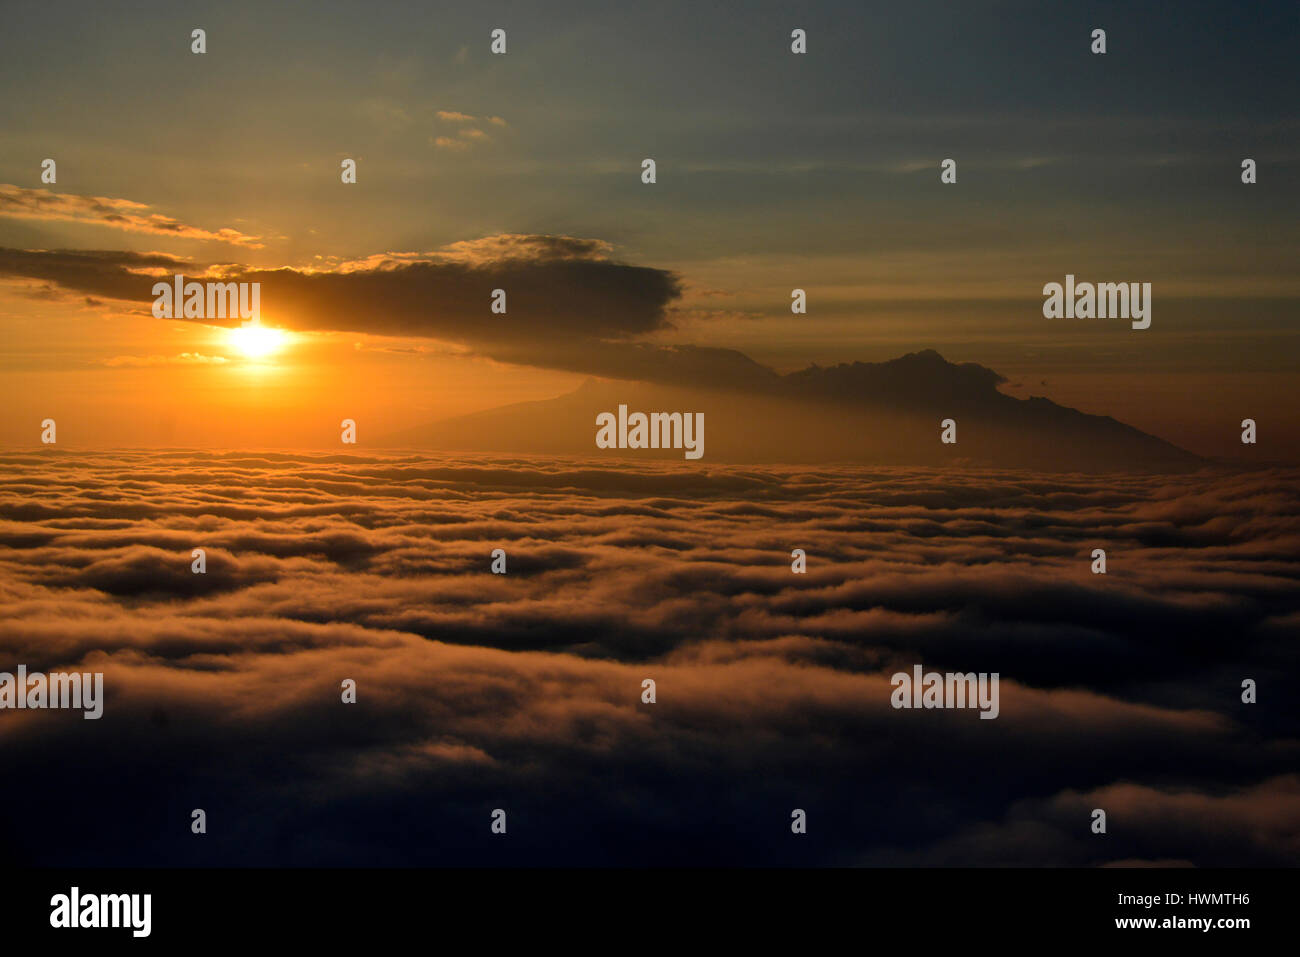 Aerial view at dawn of Mt Kilimanjaro above the clouds, Tanzania, Africa. Stock Photo